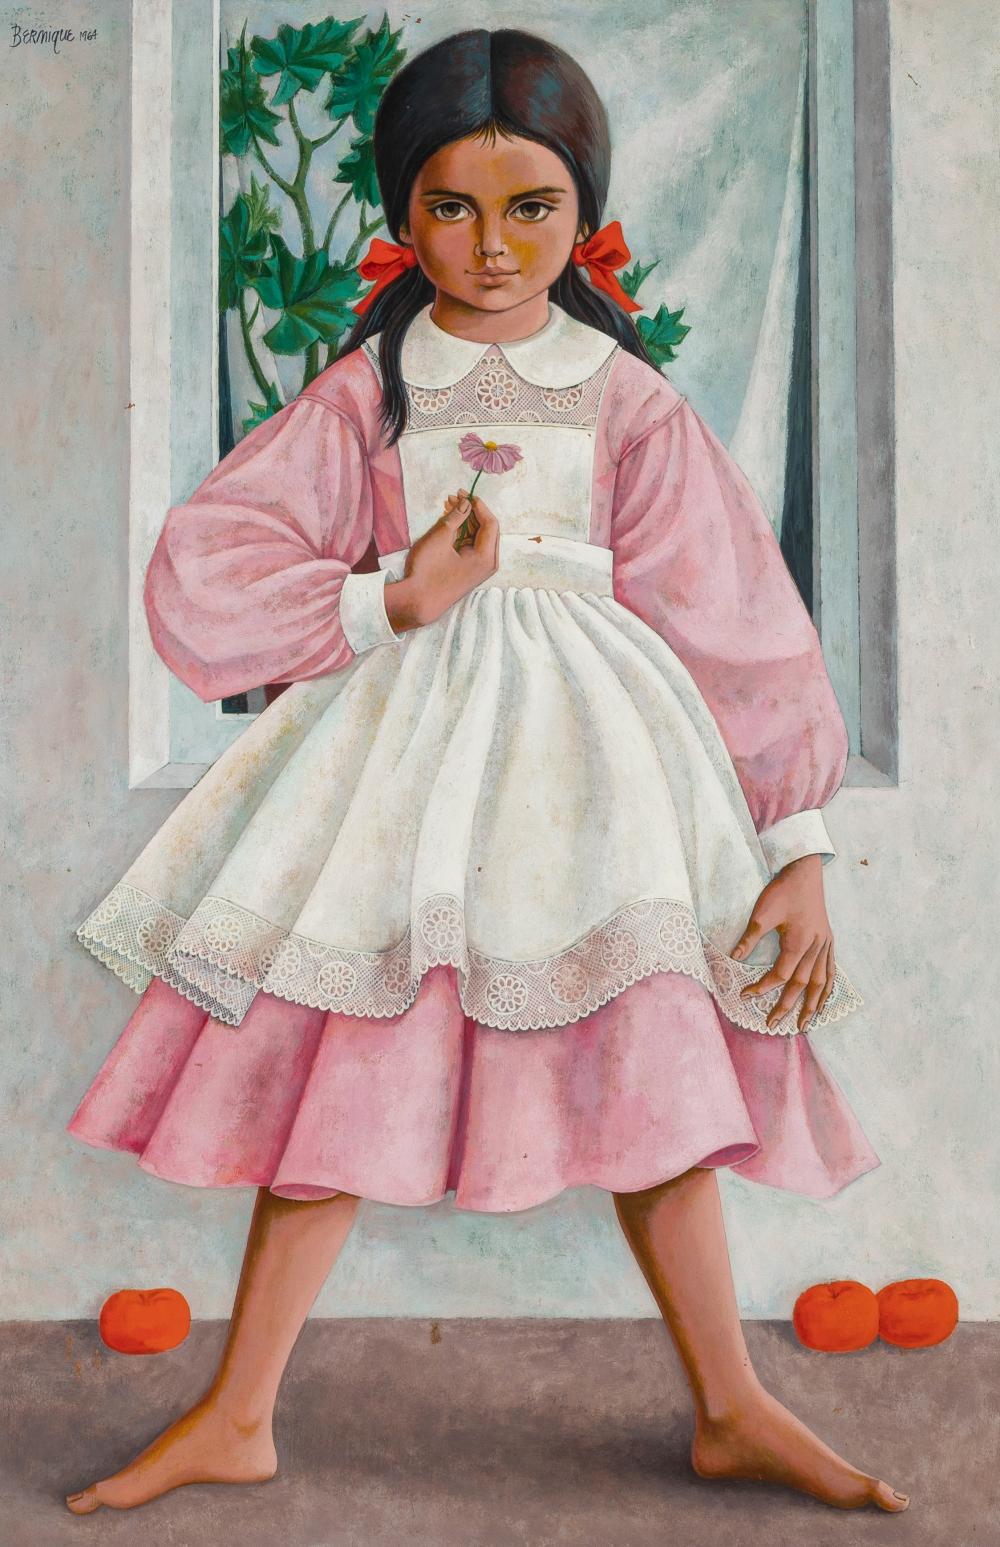 BERNIQUE LONGLEY, GIRL WITH A PINK